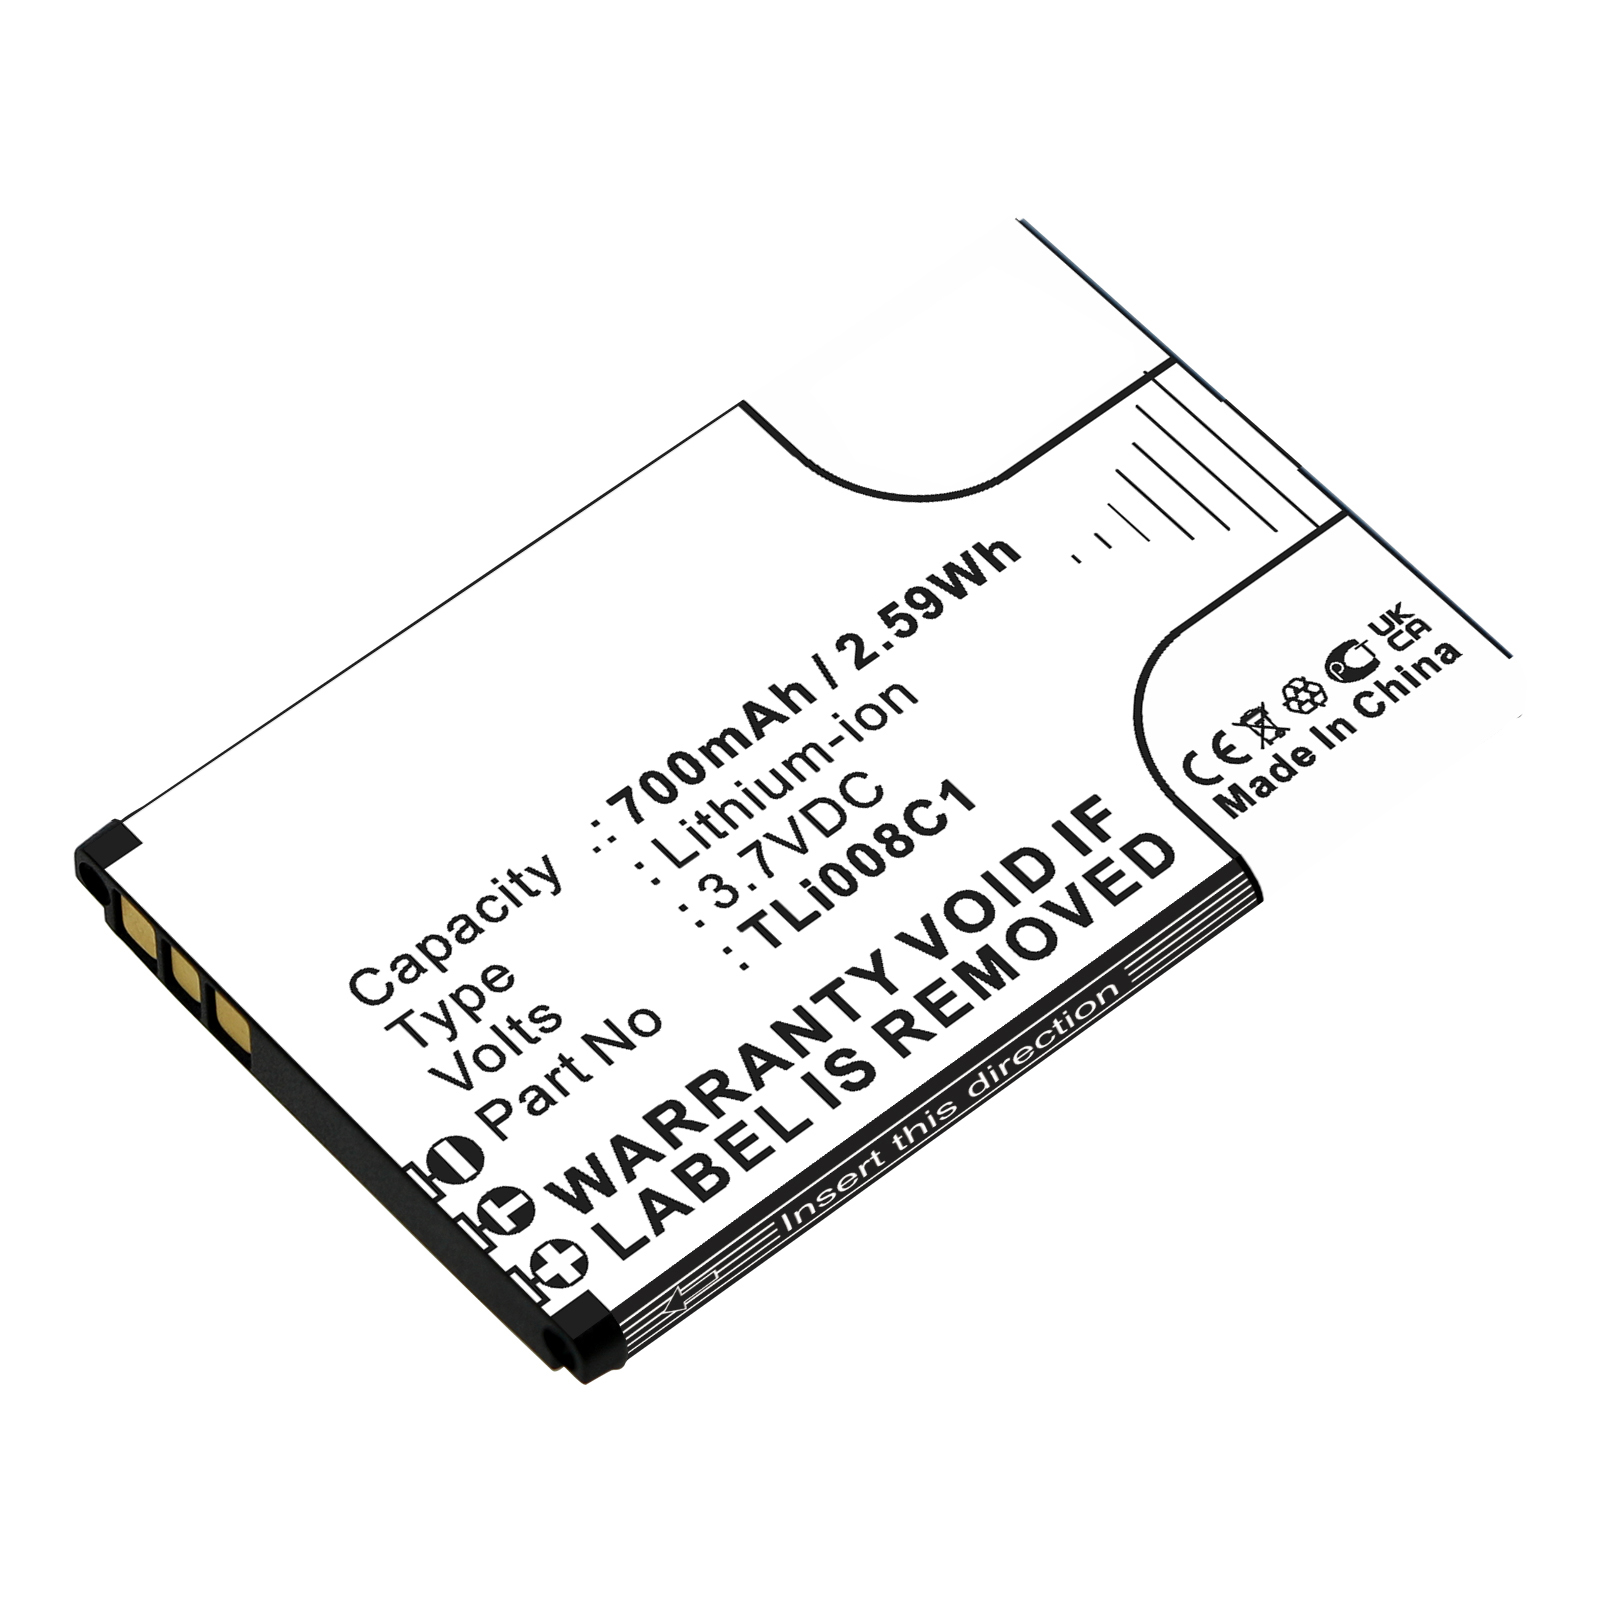 Synergy Digital Cell Phone Battery, Compatible with Alcatel TLi008C1 Cell Phone Battery (Li-ion, 3.7V, 700mAh)